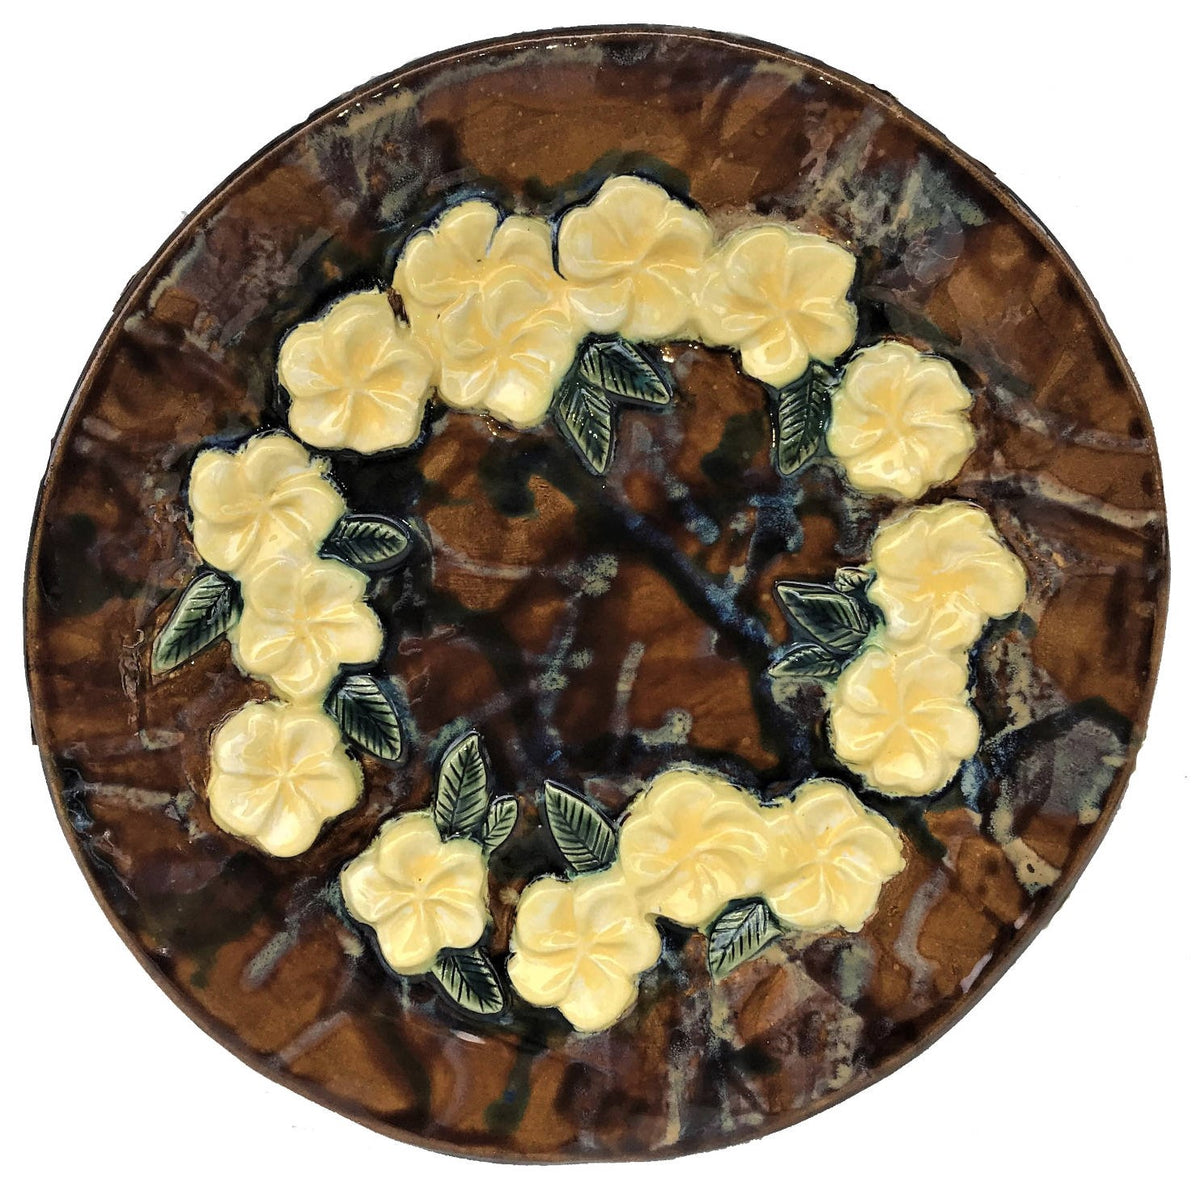 Our circular Hawaiian Plumeria Flower Wall Plaque with Browns and Yellows